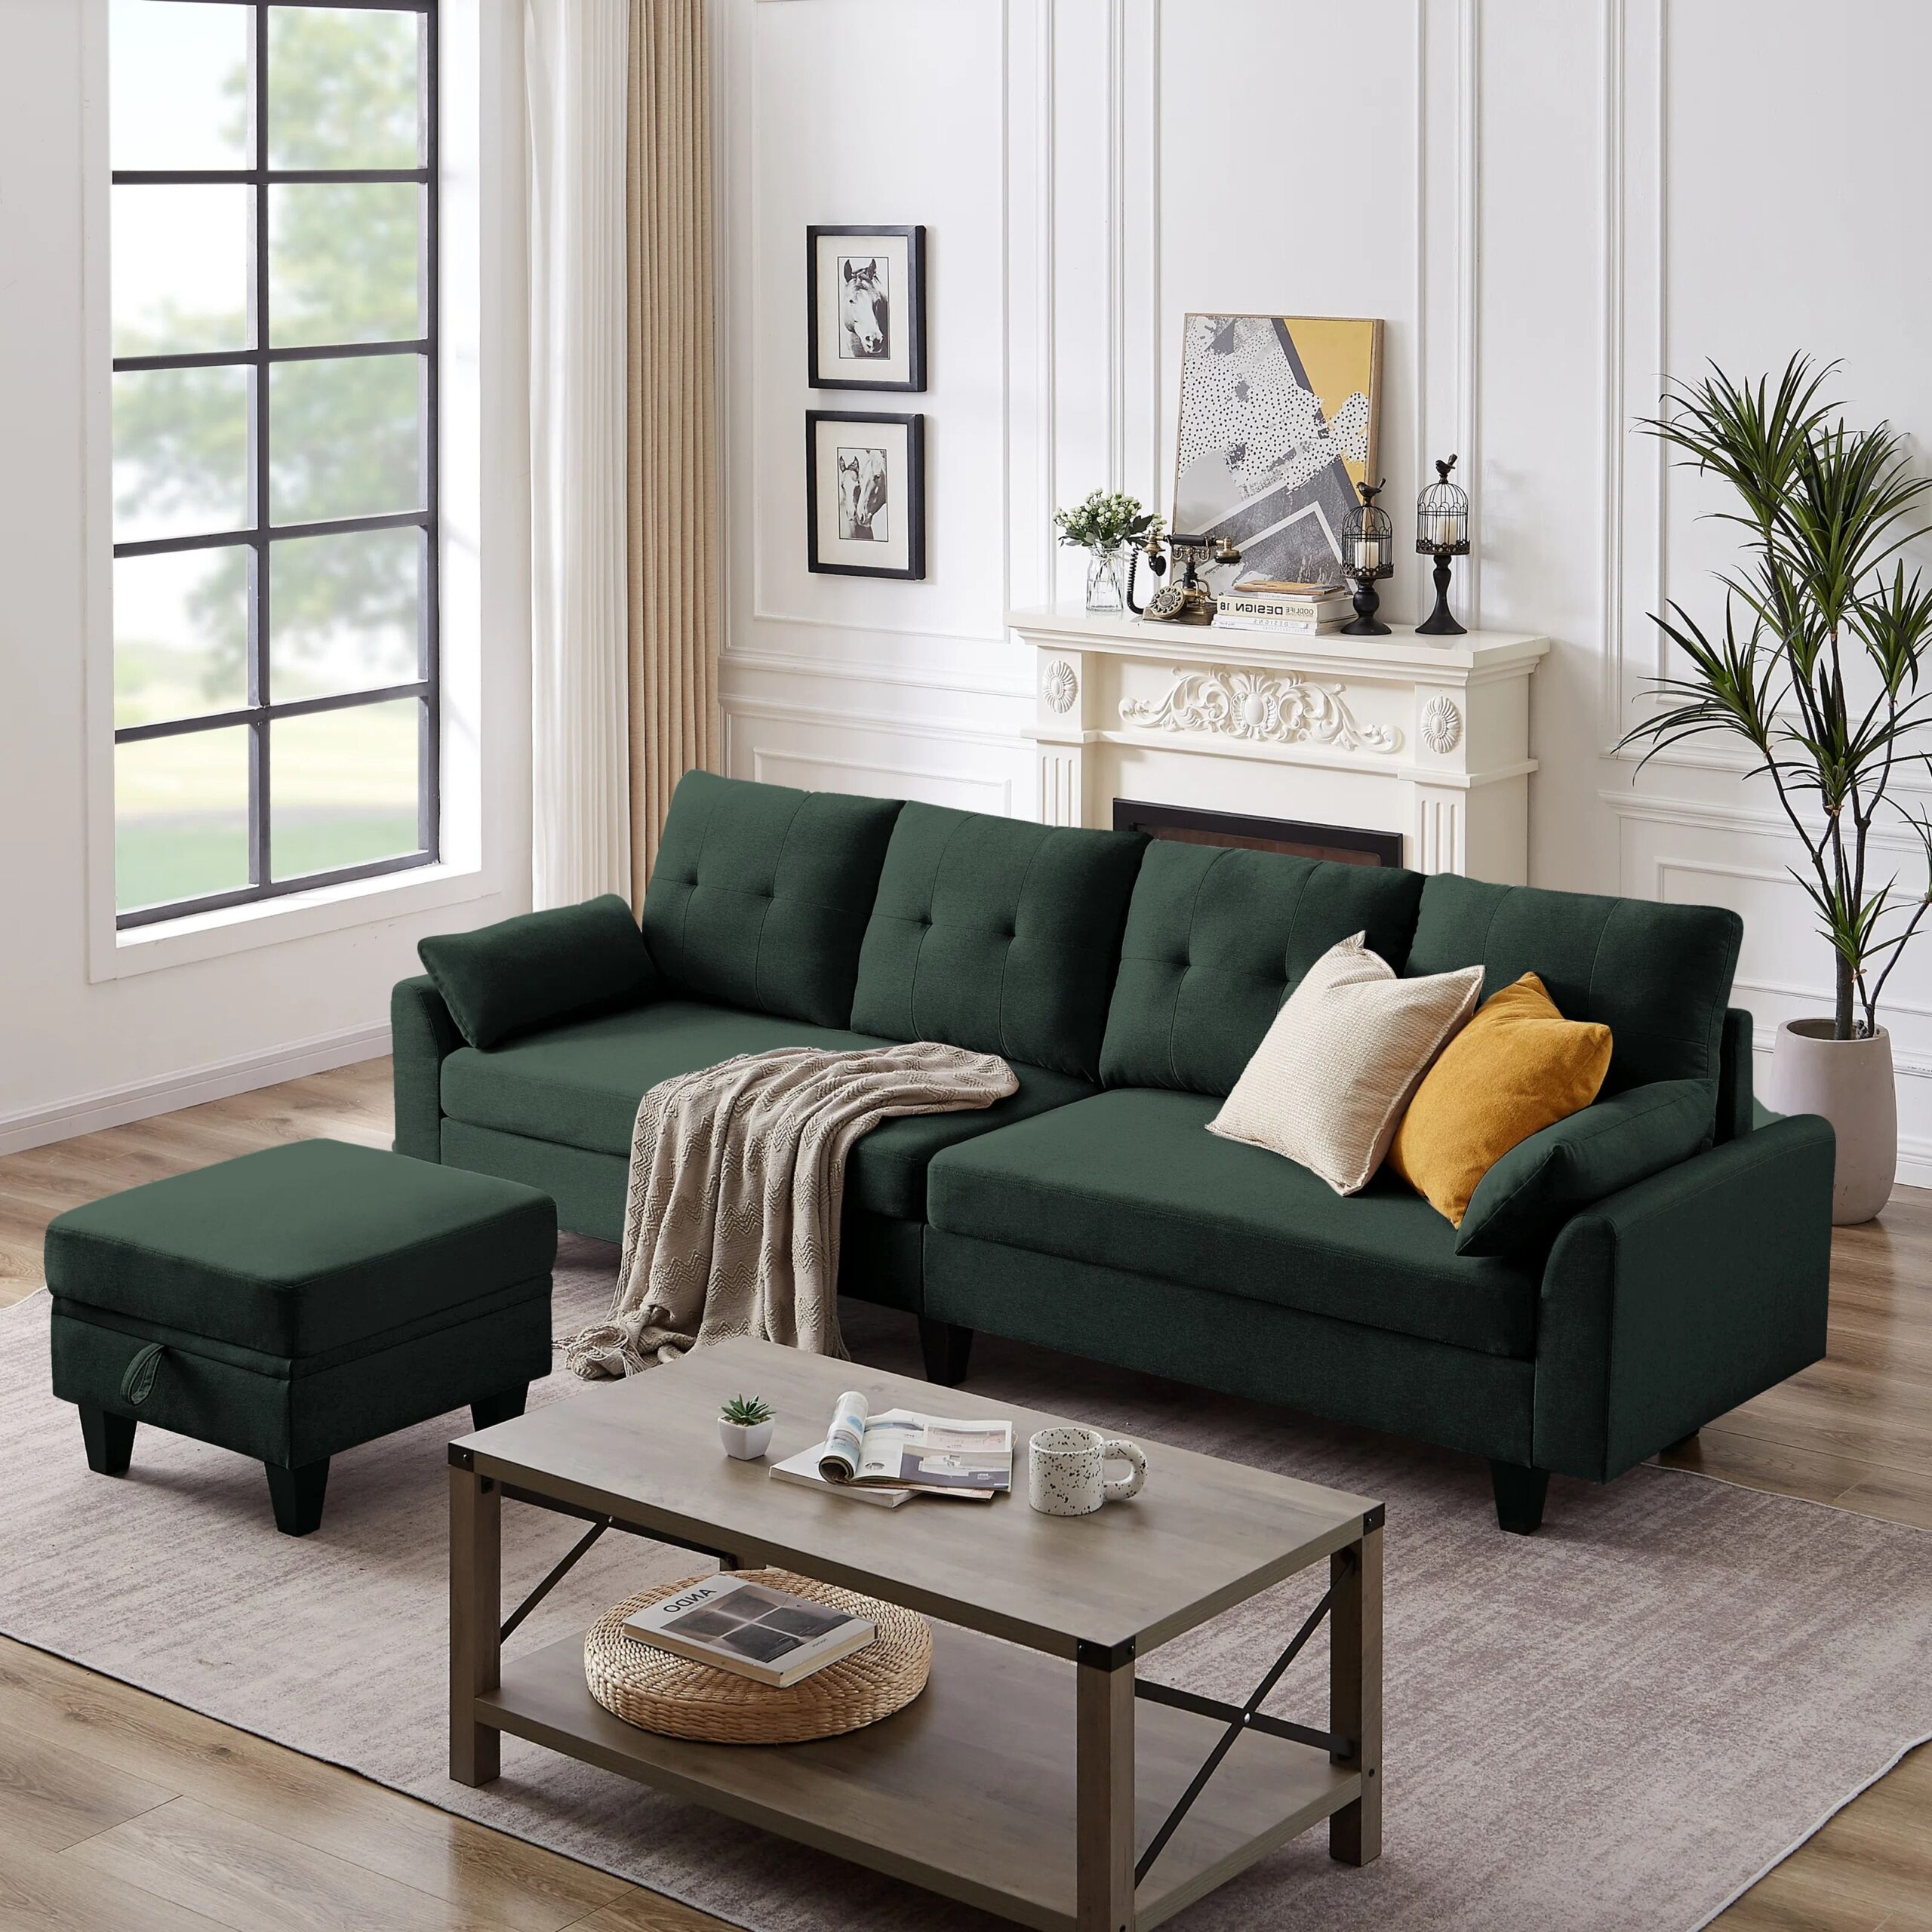 Go Green: Embrace Sustainability and Style with a Green Sectional Sofa with Chaise